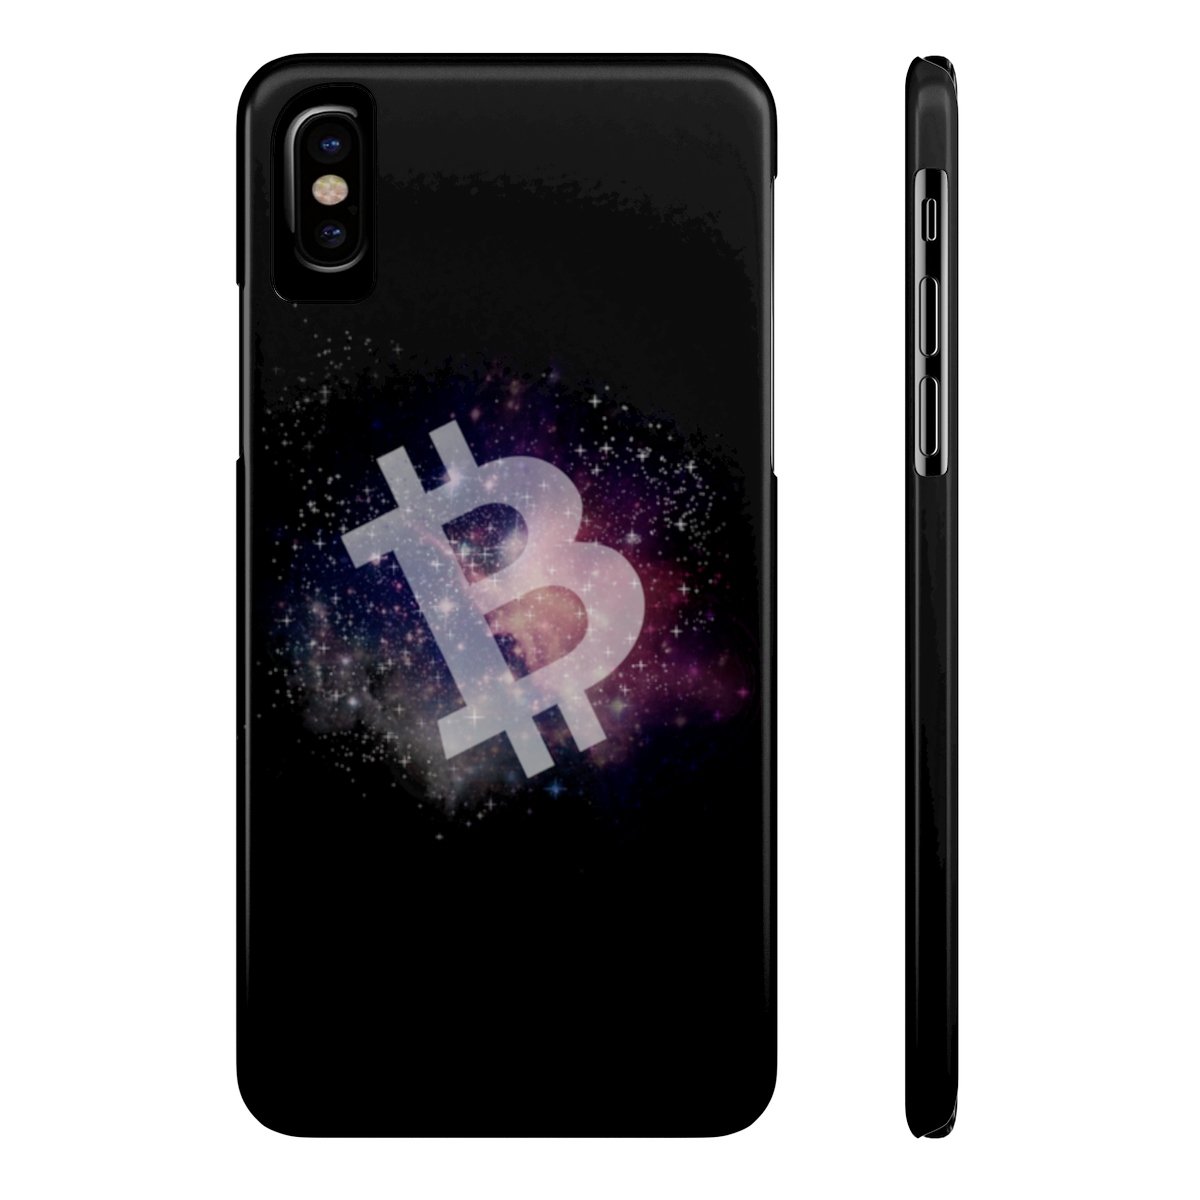 Bitcoin universe - Case Mate Slim Phone Cases TCP1607 iPhone X Slim Official Crypto  Merch